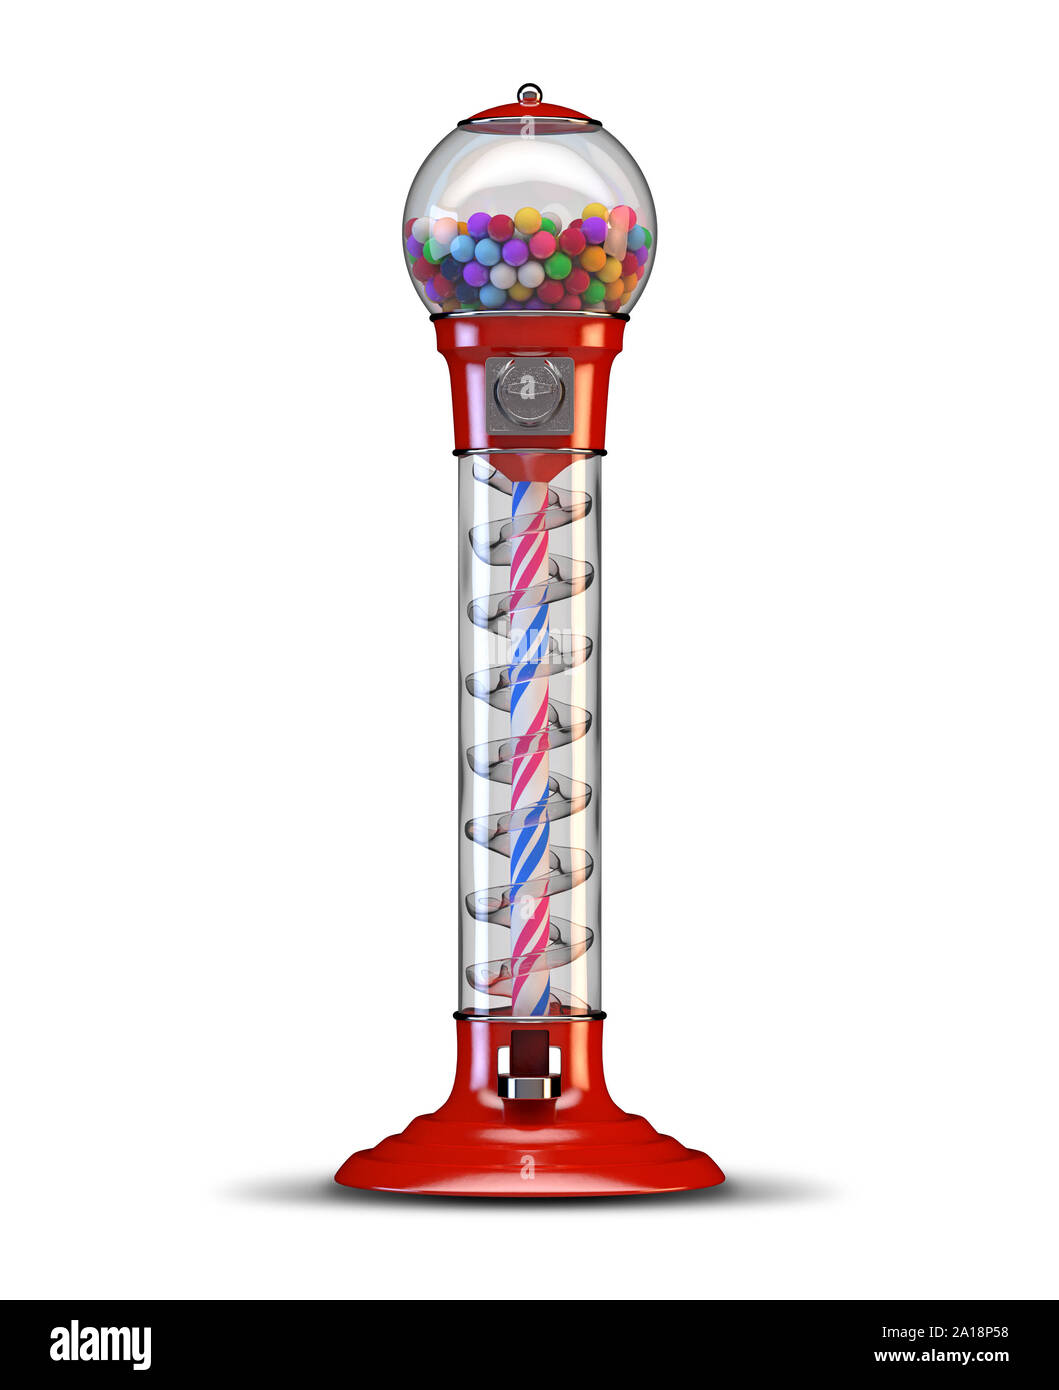 A red vintage gumball dispensing machine filled with multicolored gumballs on an isolated white background - 3D render Stock Photo